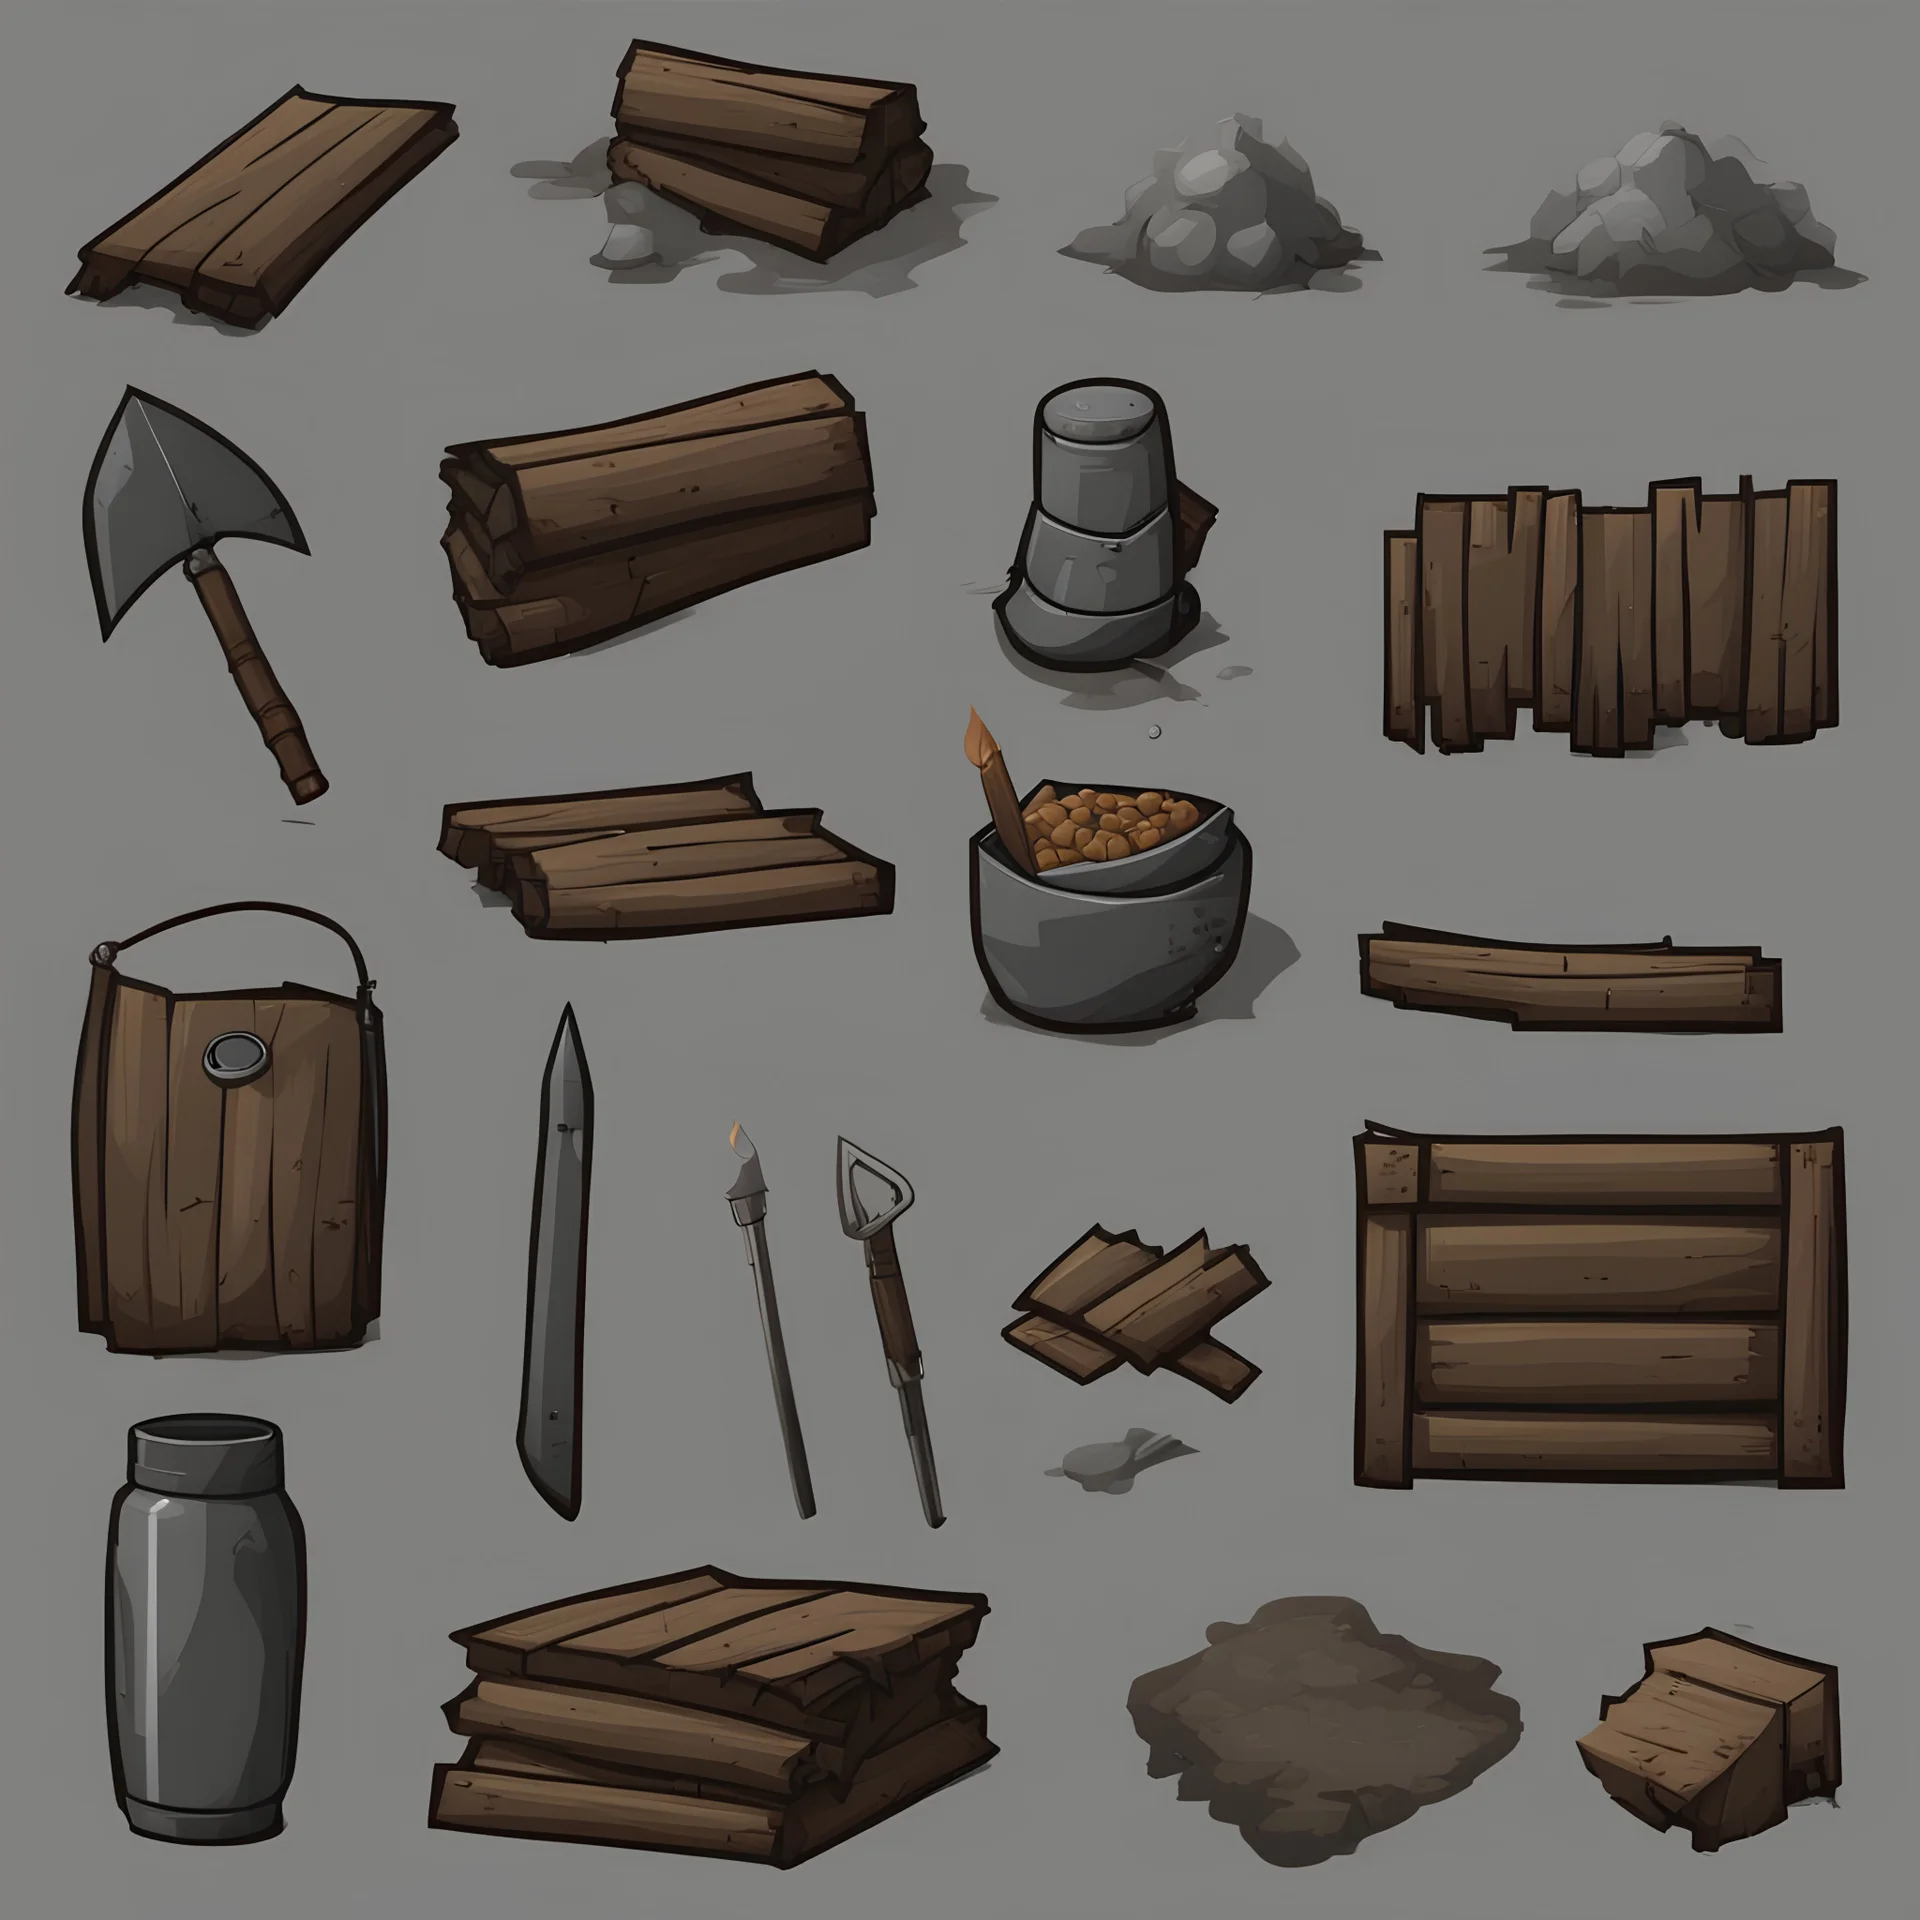 Sprite sheet, Wood, Nails, Metal scrap, Electronics, Tarps, Water, Food, Clothing, Tools, icons, survival game, gray background, comic book,